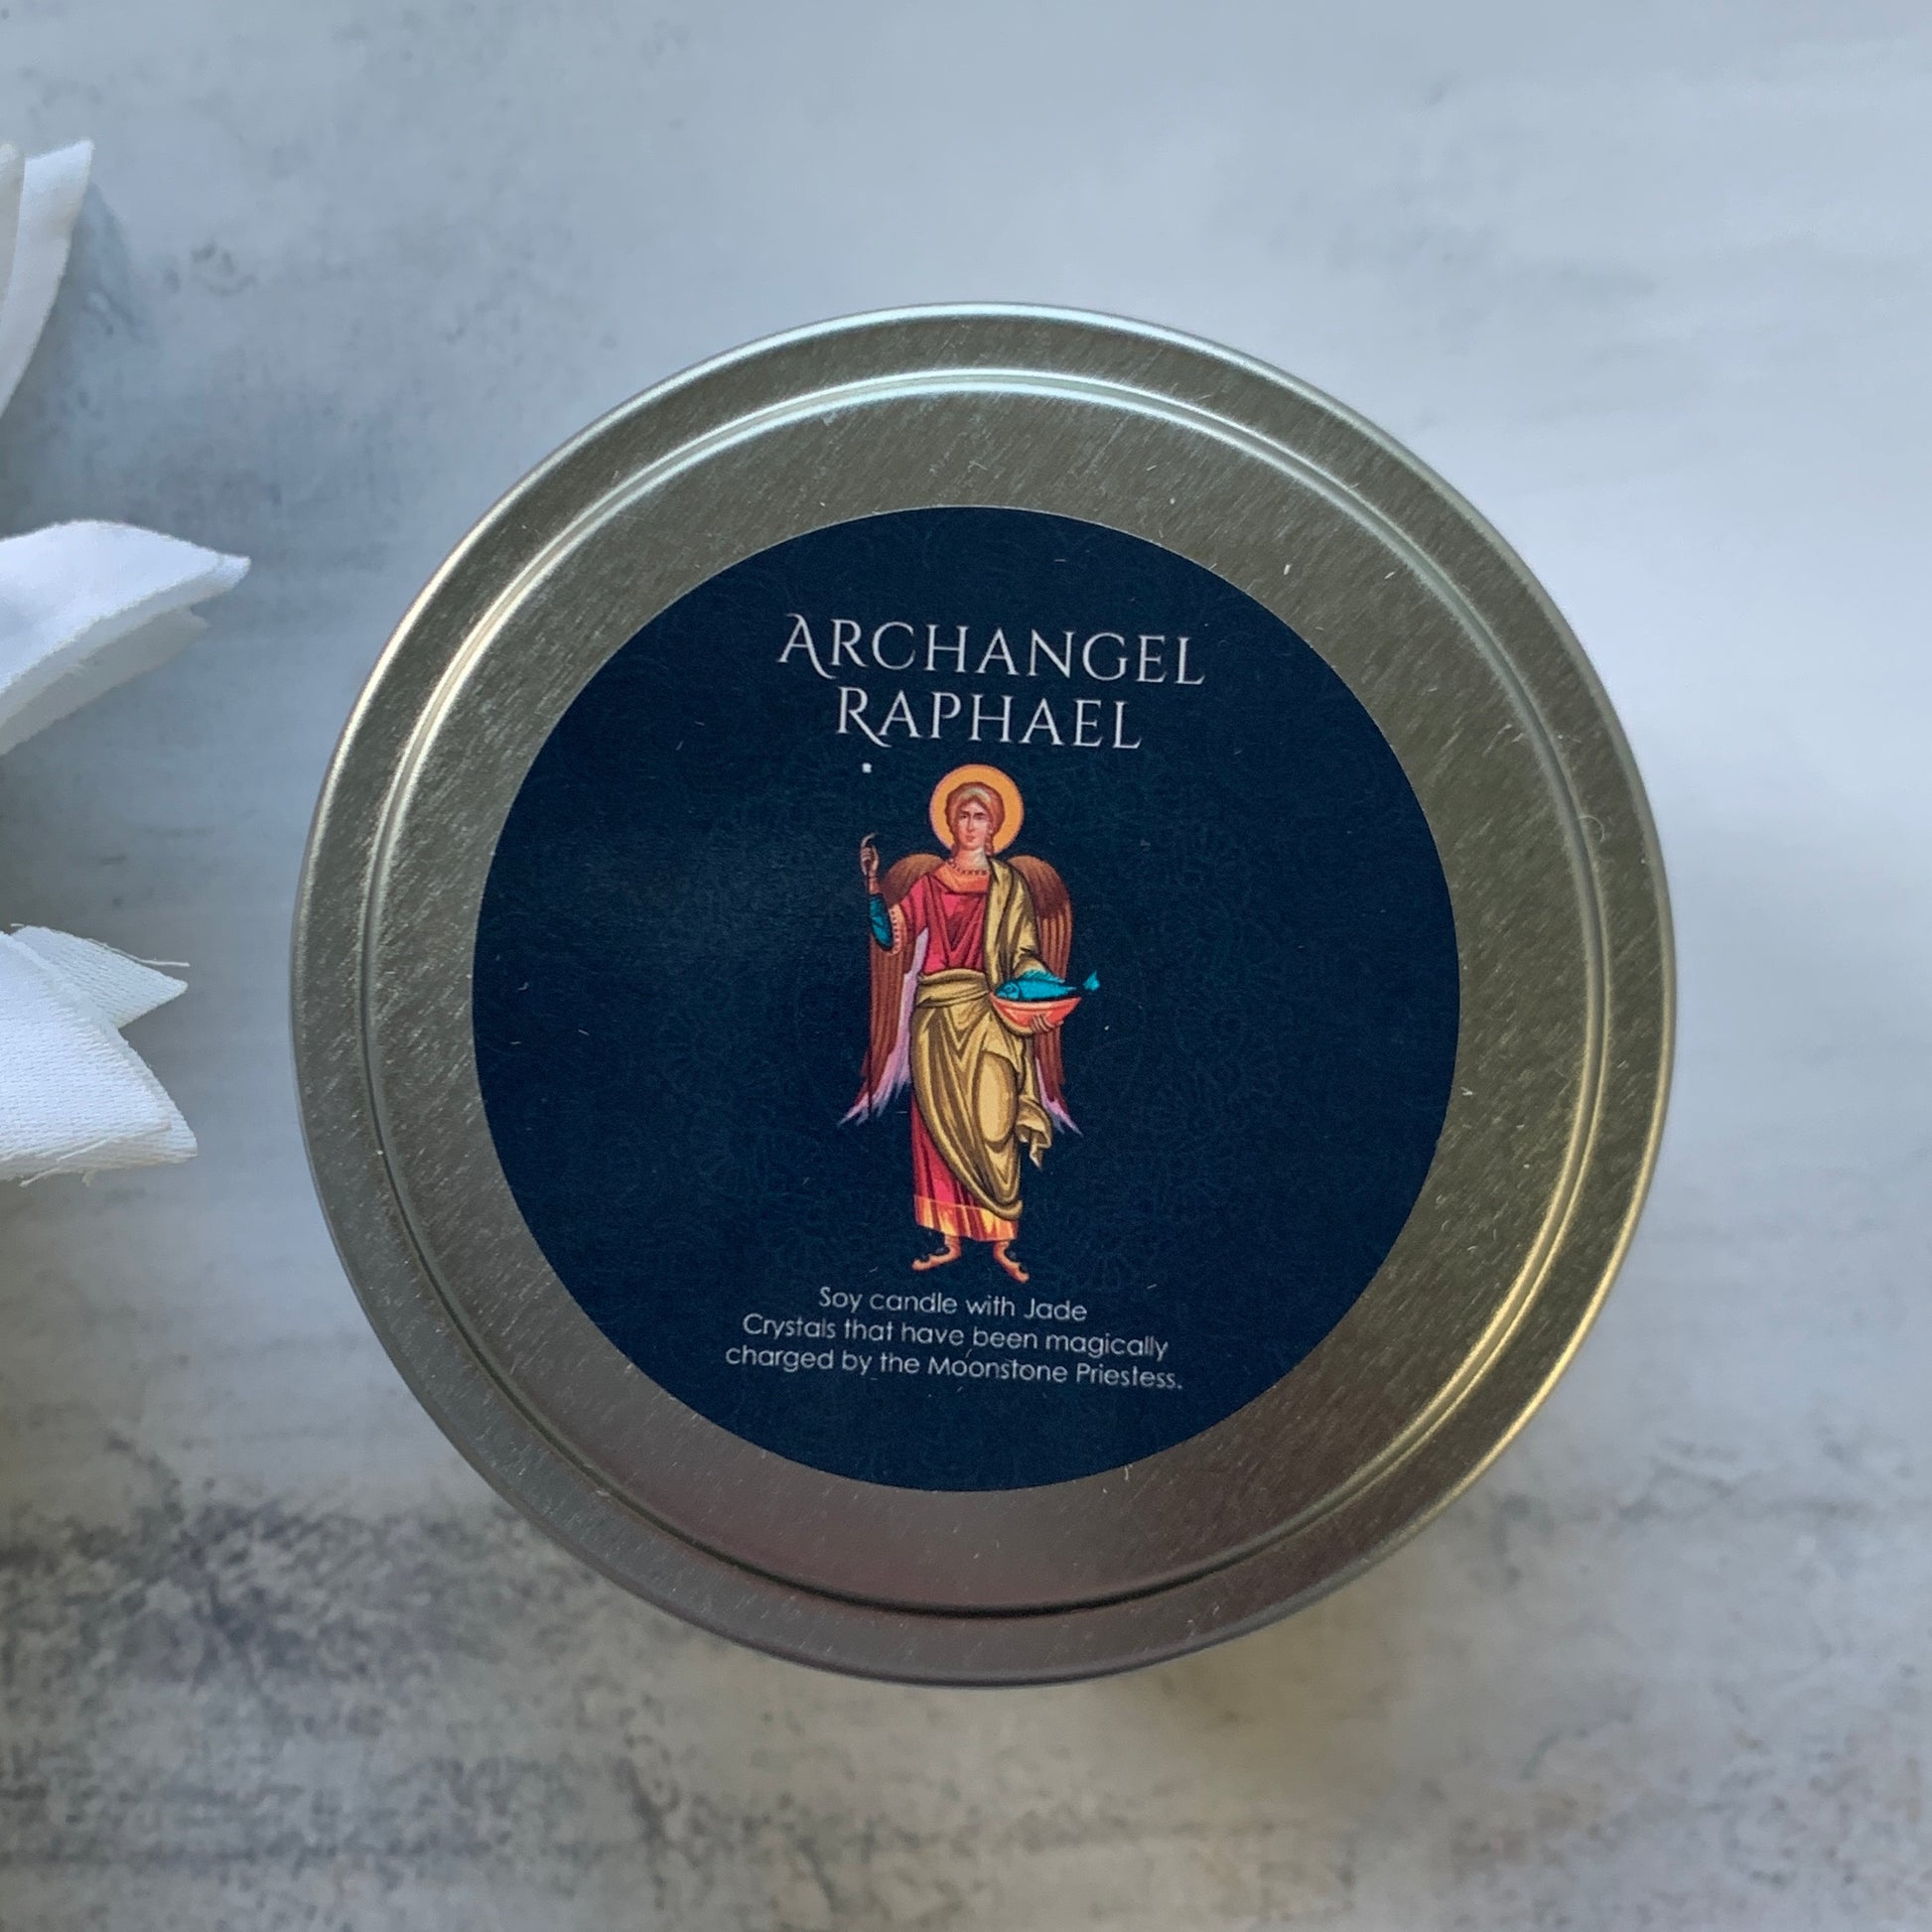 Archangel Raphael Healing Candle with Jade Crystals